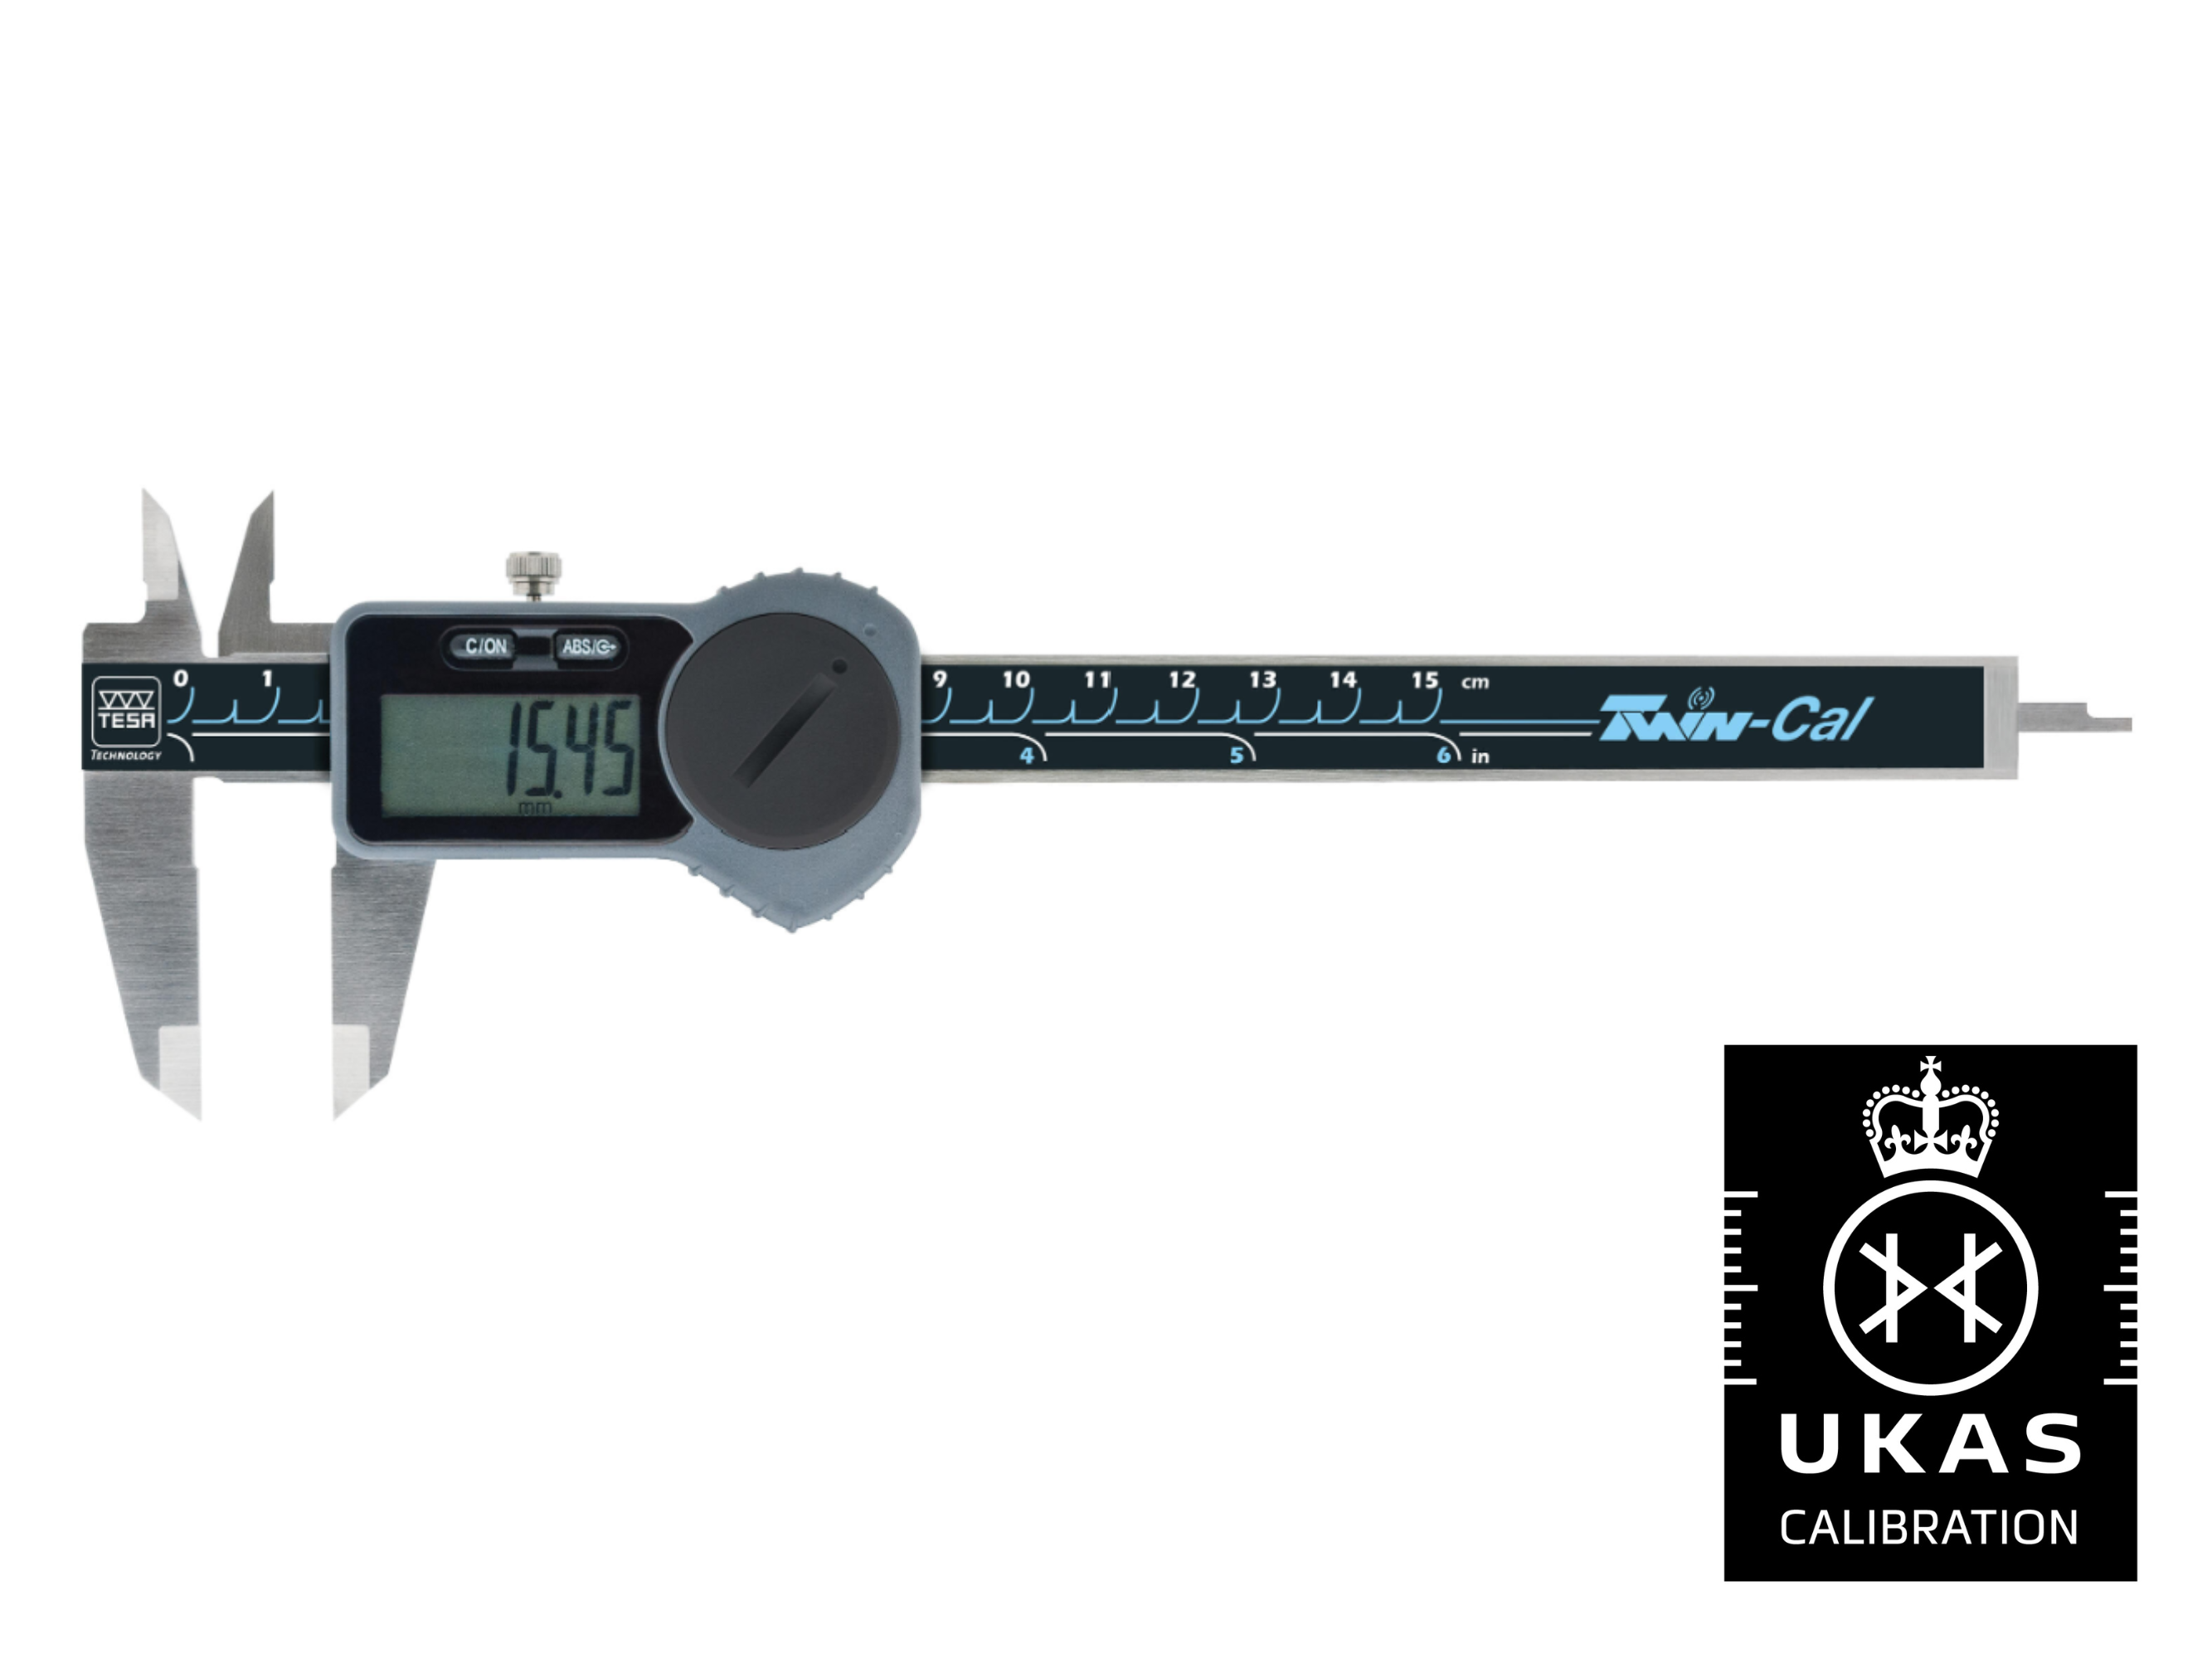 Universal Digital Calipers  0-150mm (Square Depth Rod) 00530097 with UKAS Calibration